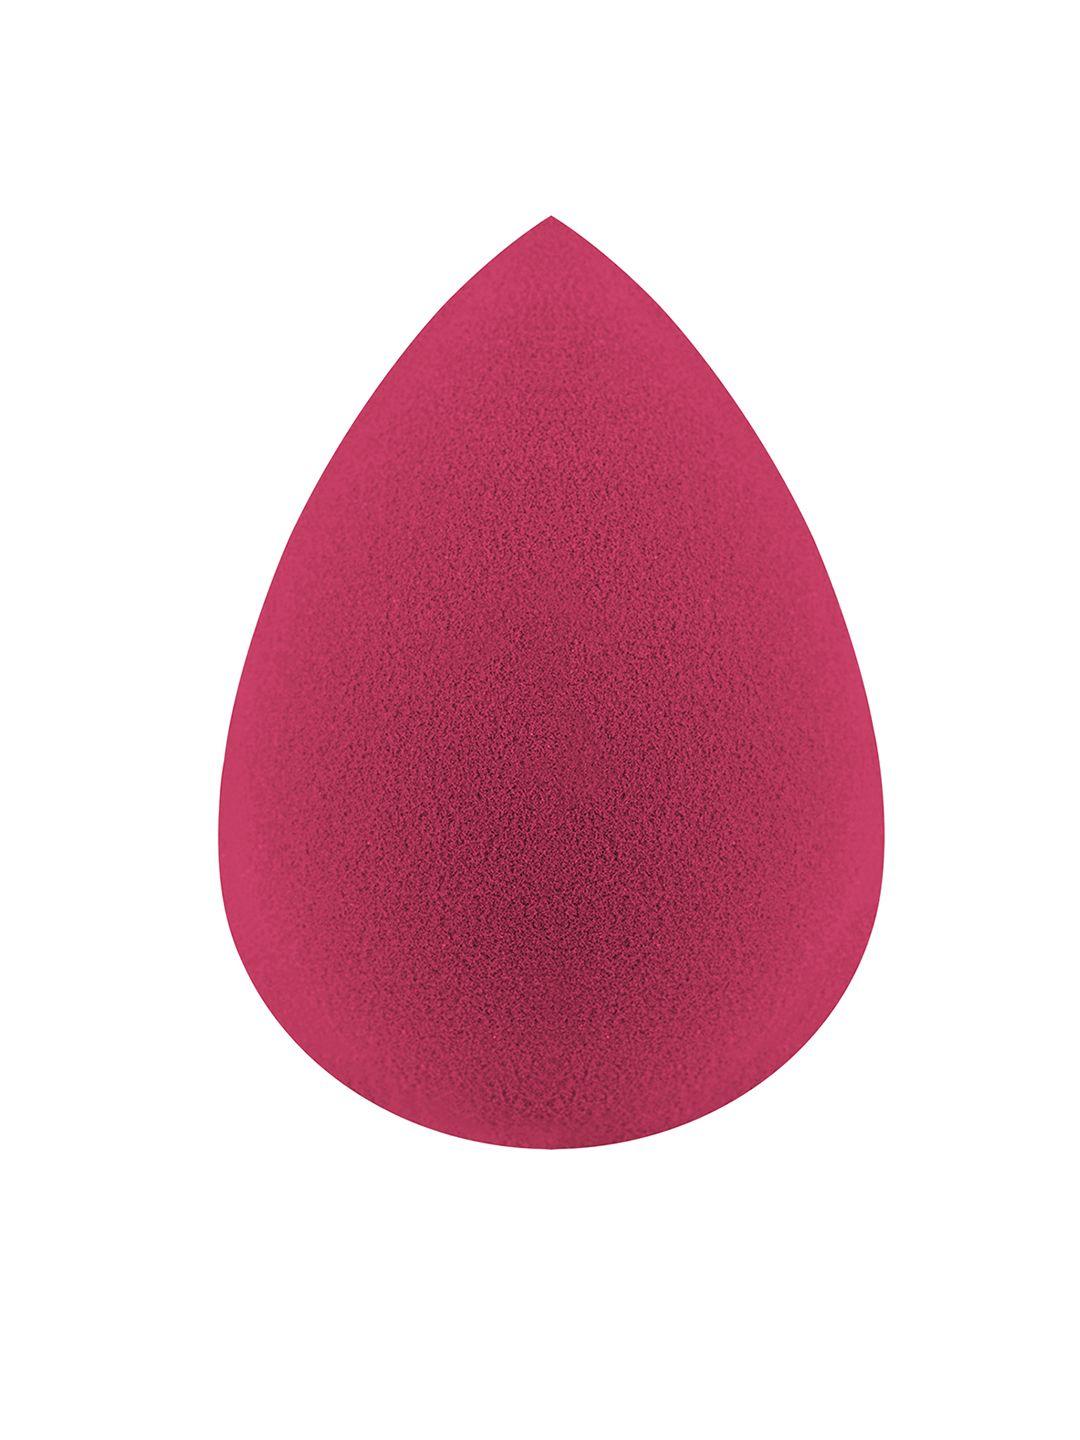 miss claire puff perfect beauty blender - floral